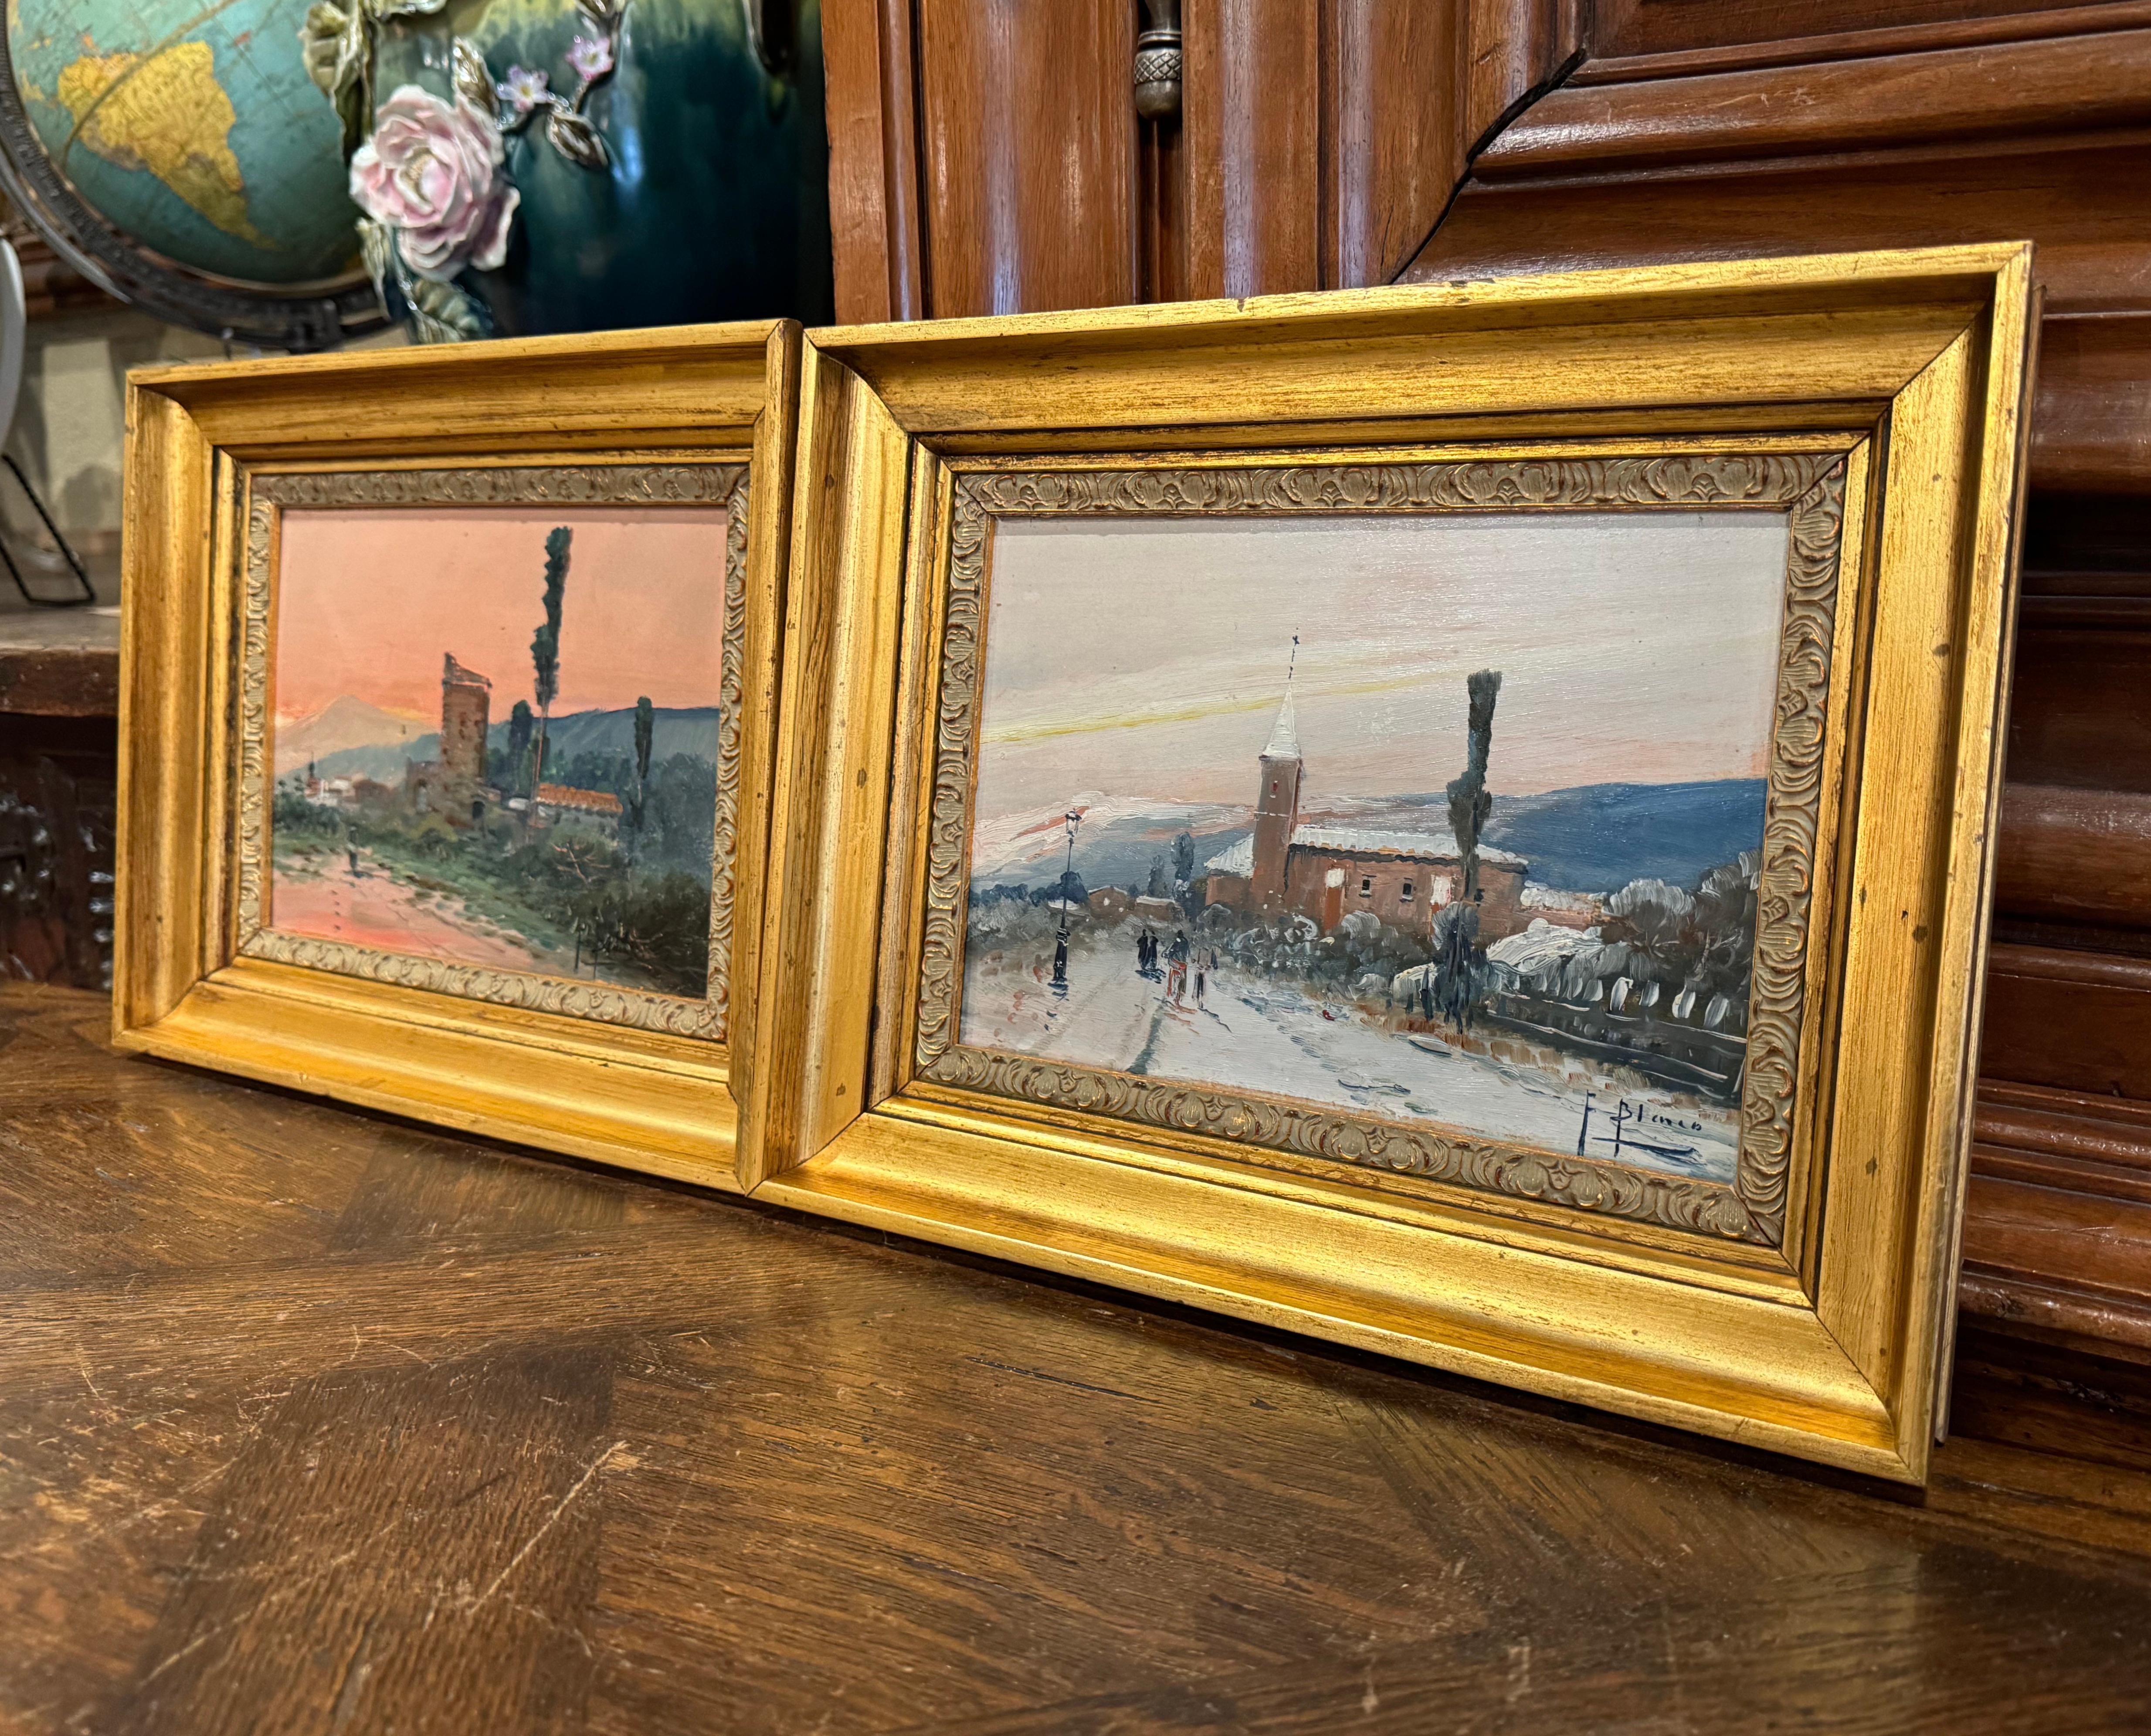 Decorate a powder room, a study or a den with this elegant pair of antique paintings. Hand painted in France circa 1920 and signed by the artist, F. Blanco, each colorful artwork on board is set in a carved giltwood frame and represent the winter